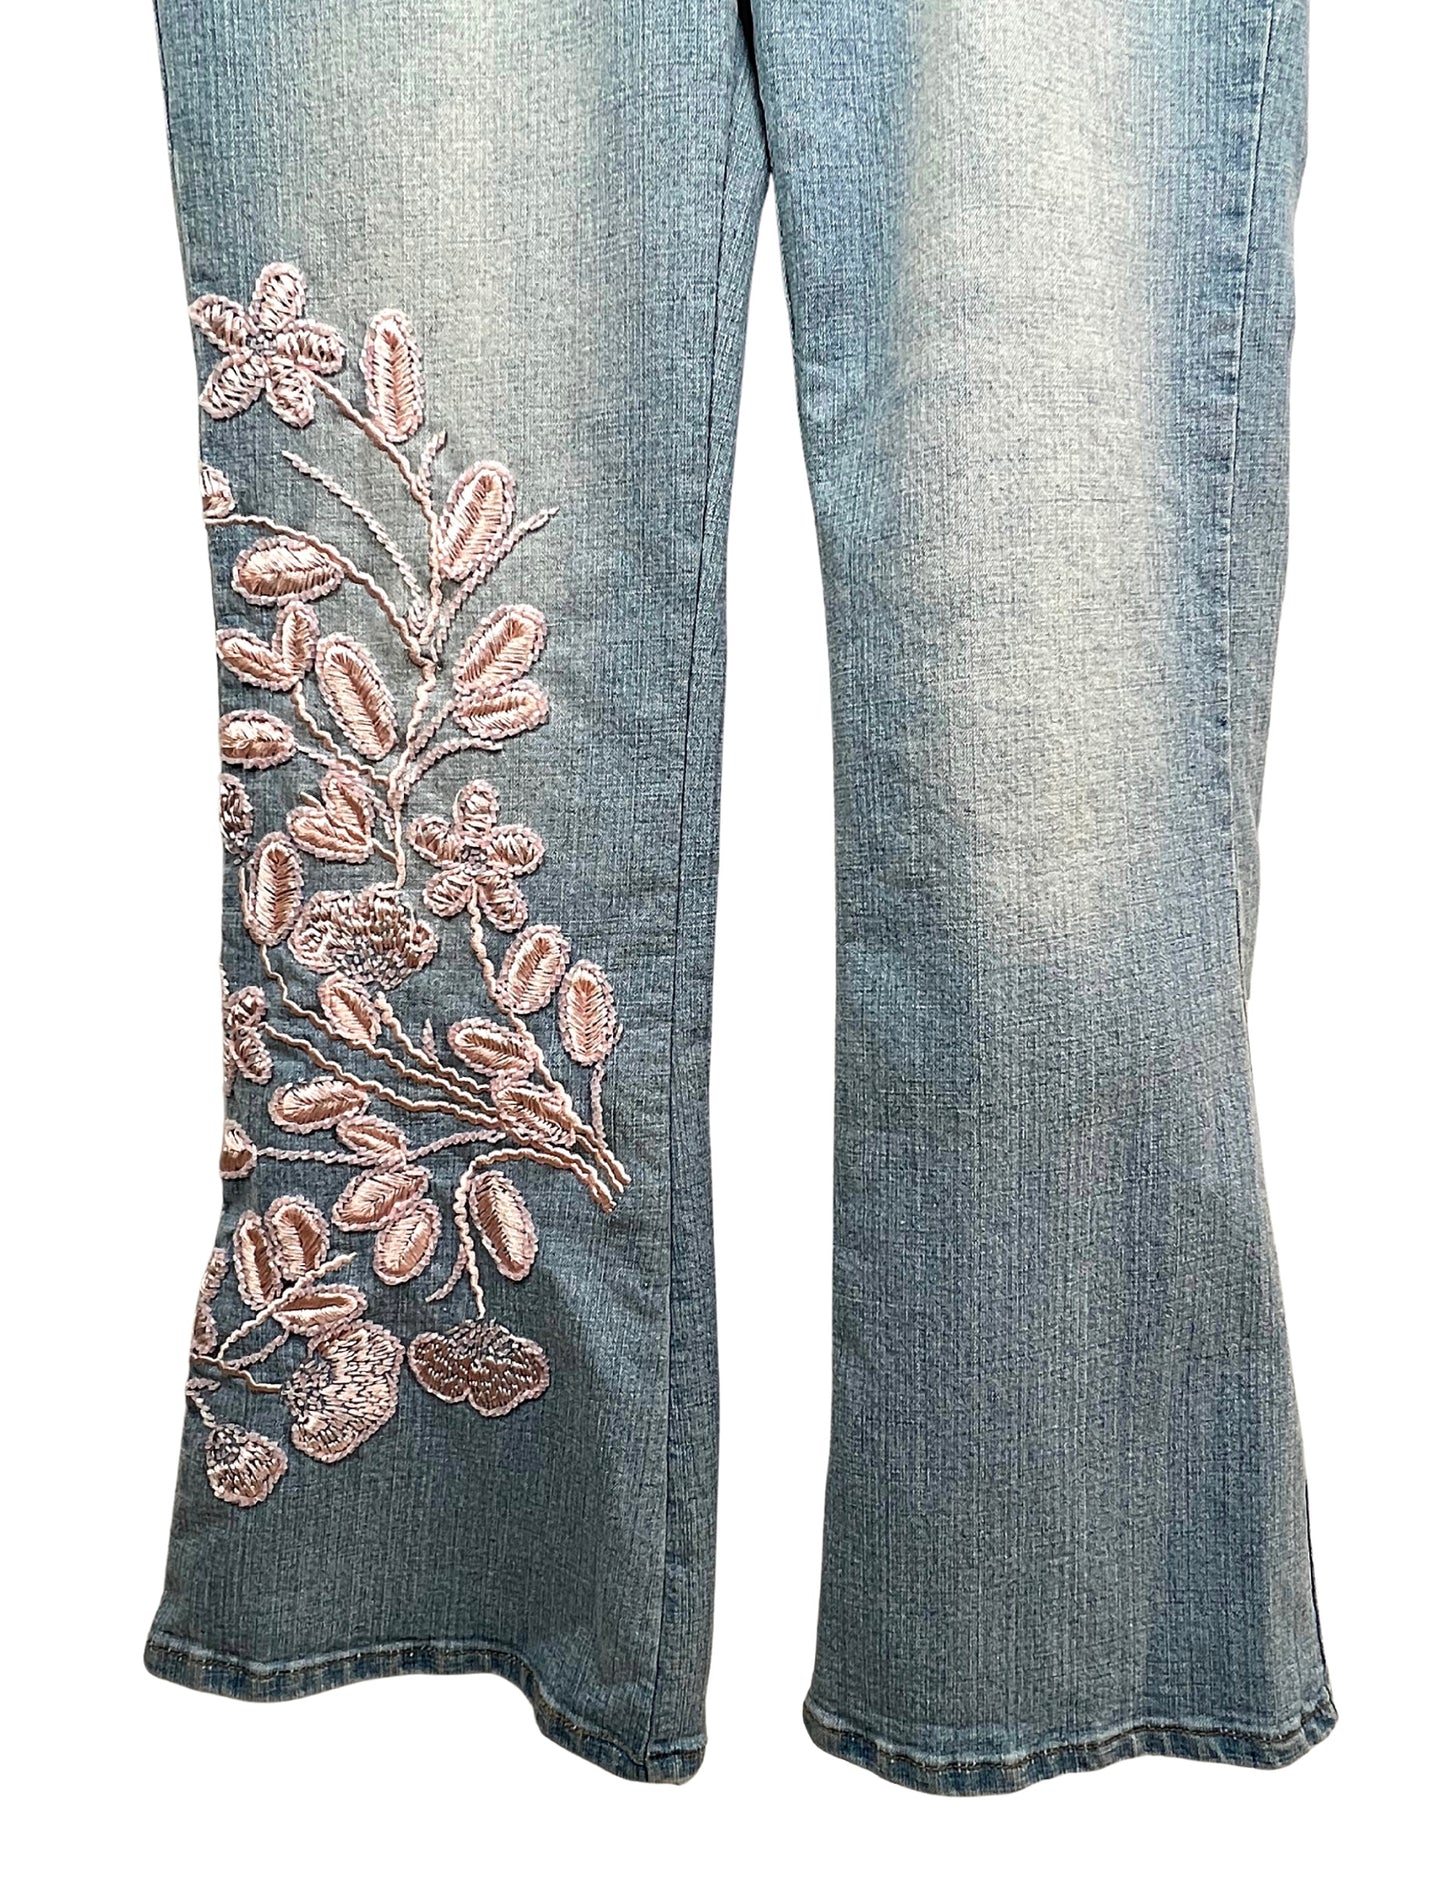 00’s Y2K Vanilla Star Pink Embroidery Floral Flare Low Rise Jeans